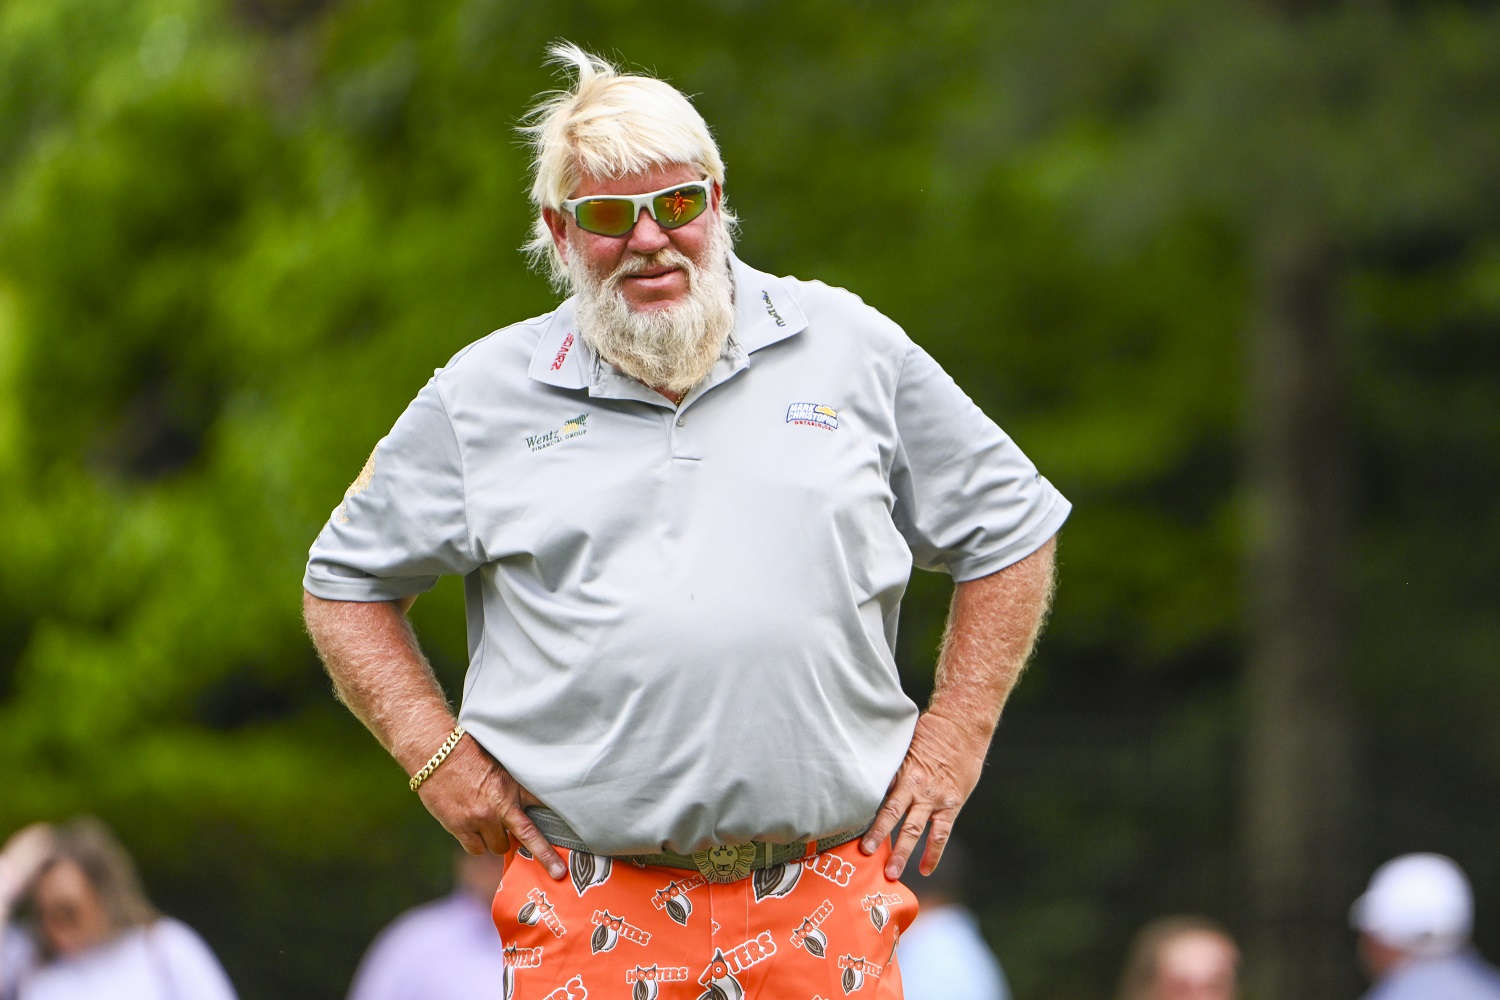 John Daly at the 17th green during the second round of the PGA Tour Champions Regions Tradition at Greystone Golf and Country Club on May 13, 2022. | Tracy Wilcox/PGA Tour via Getty Images